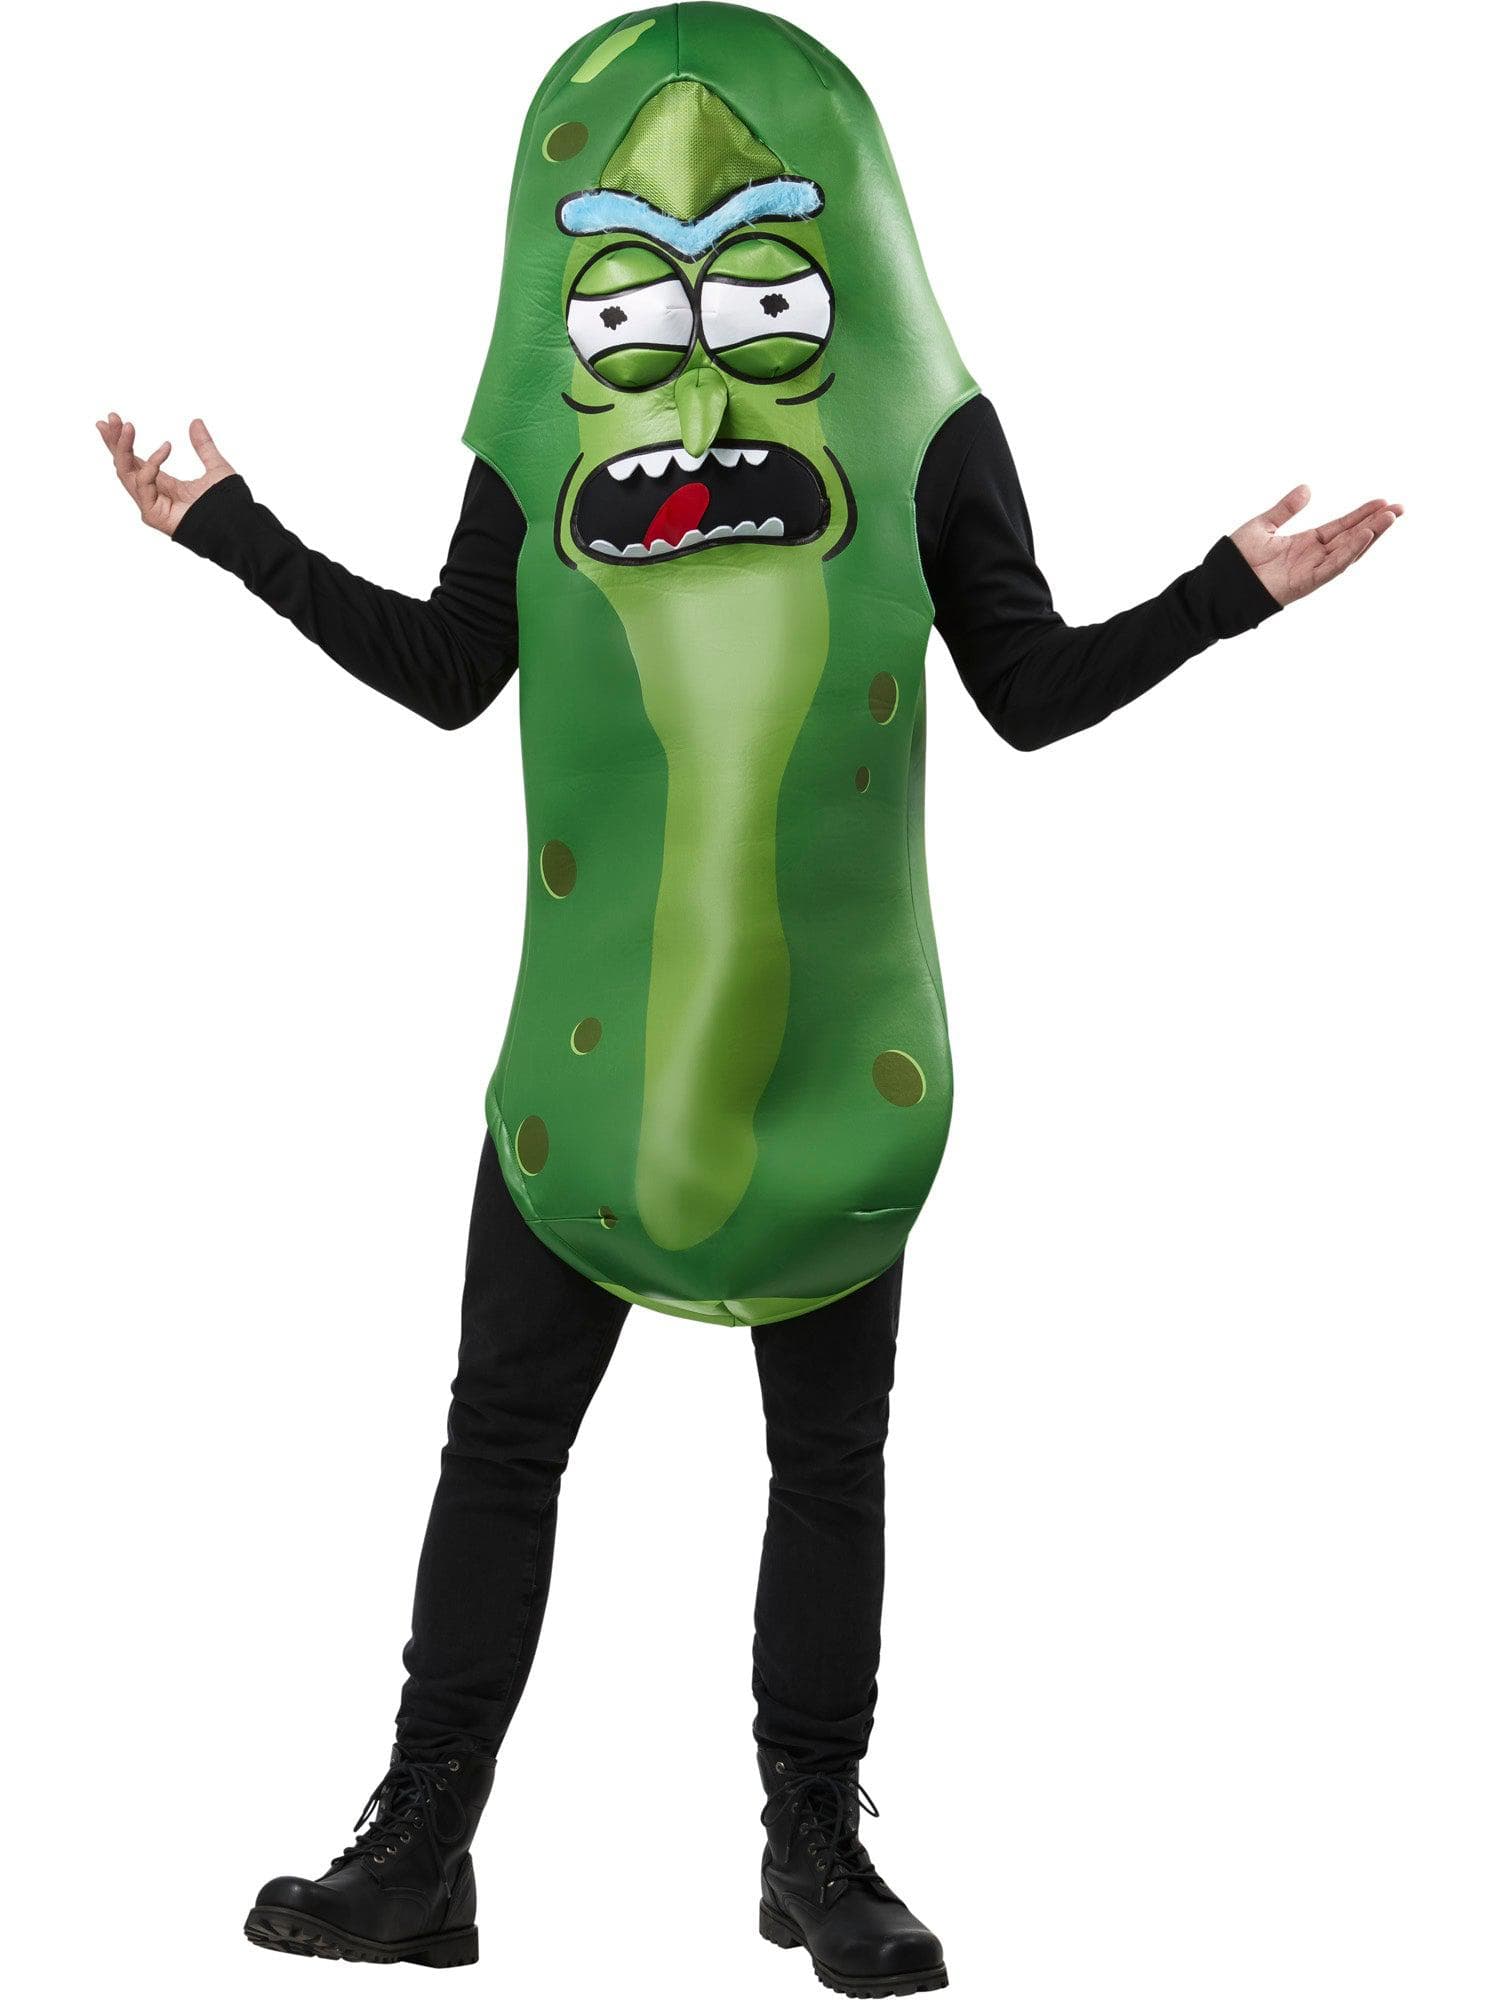 Rick and Morty Pickle Rick Adult Costume - costumes.com